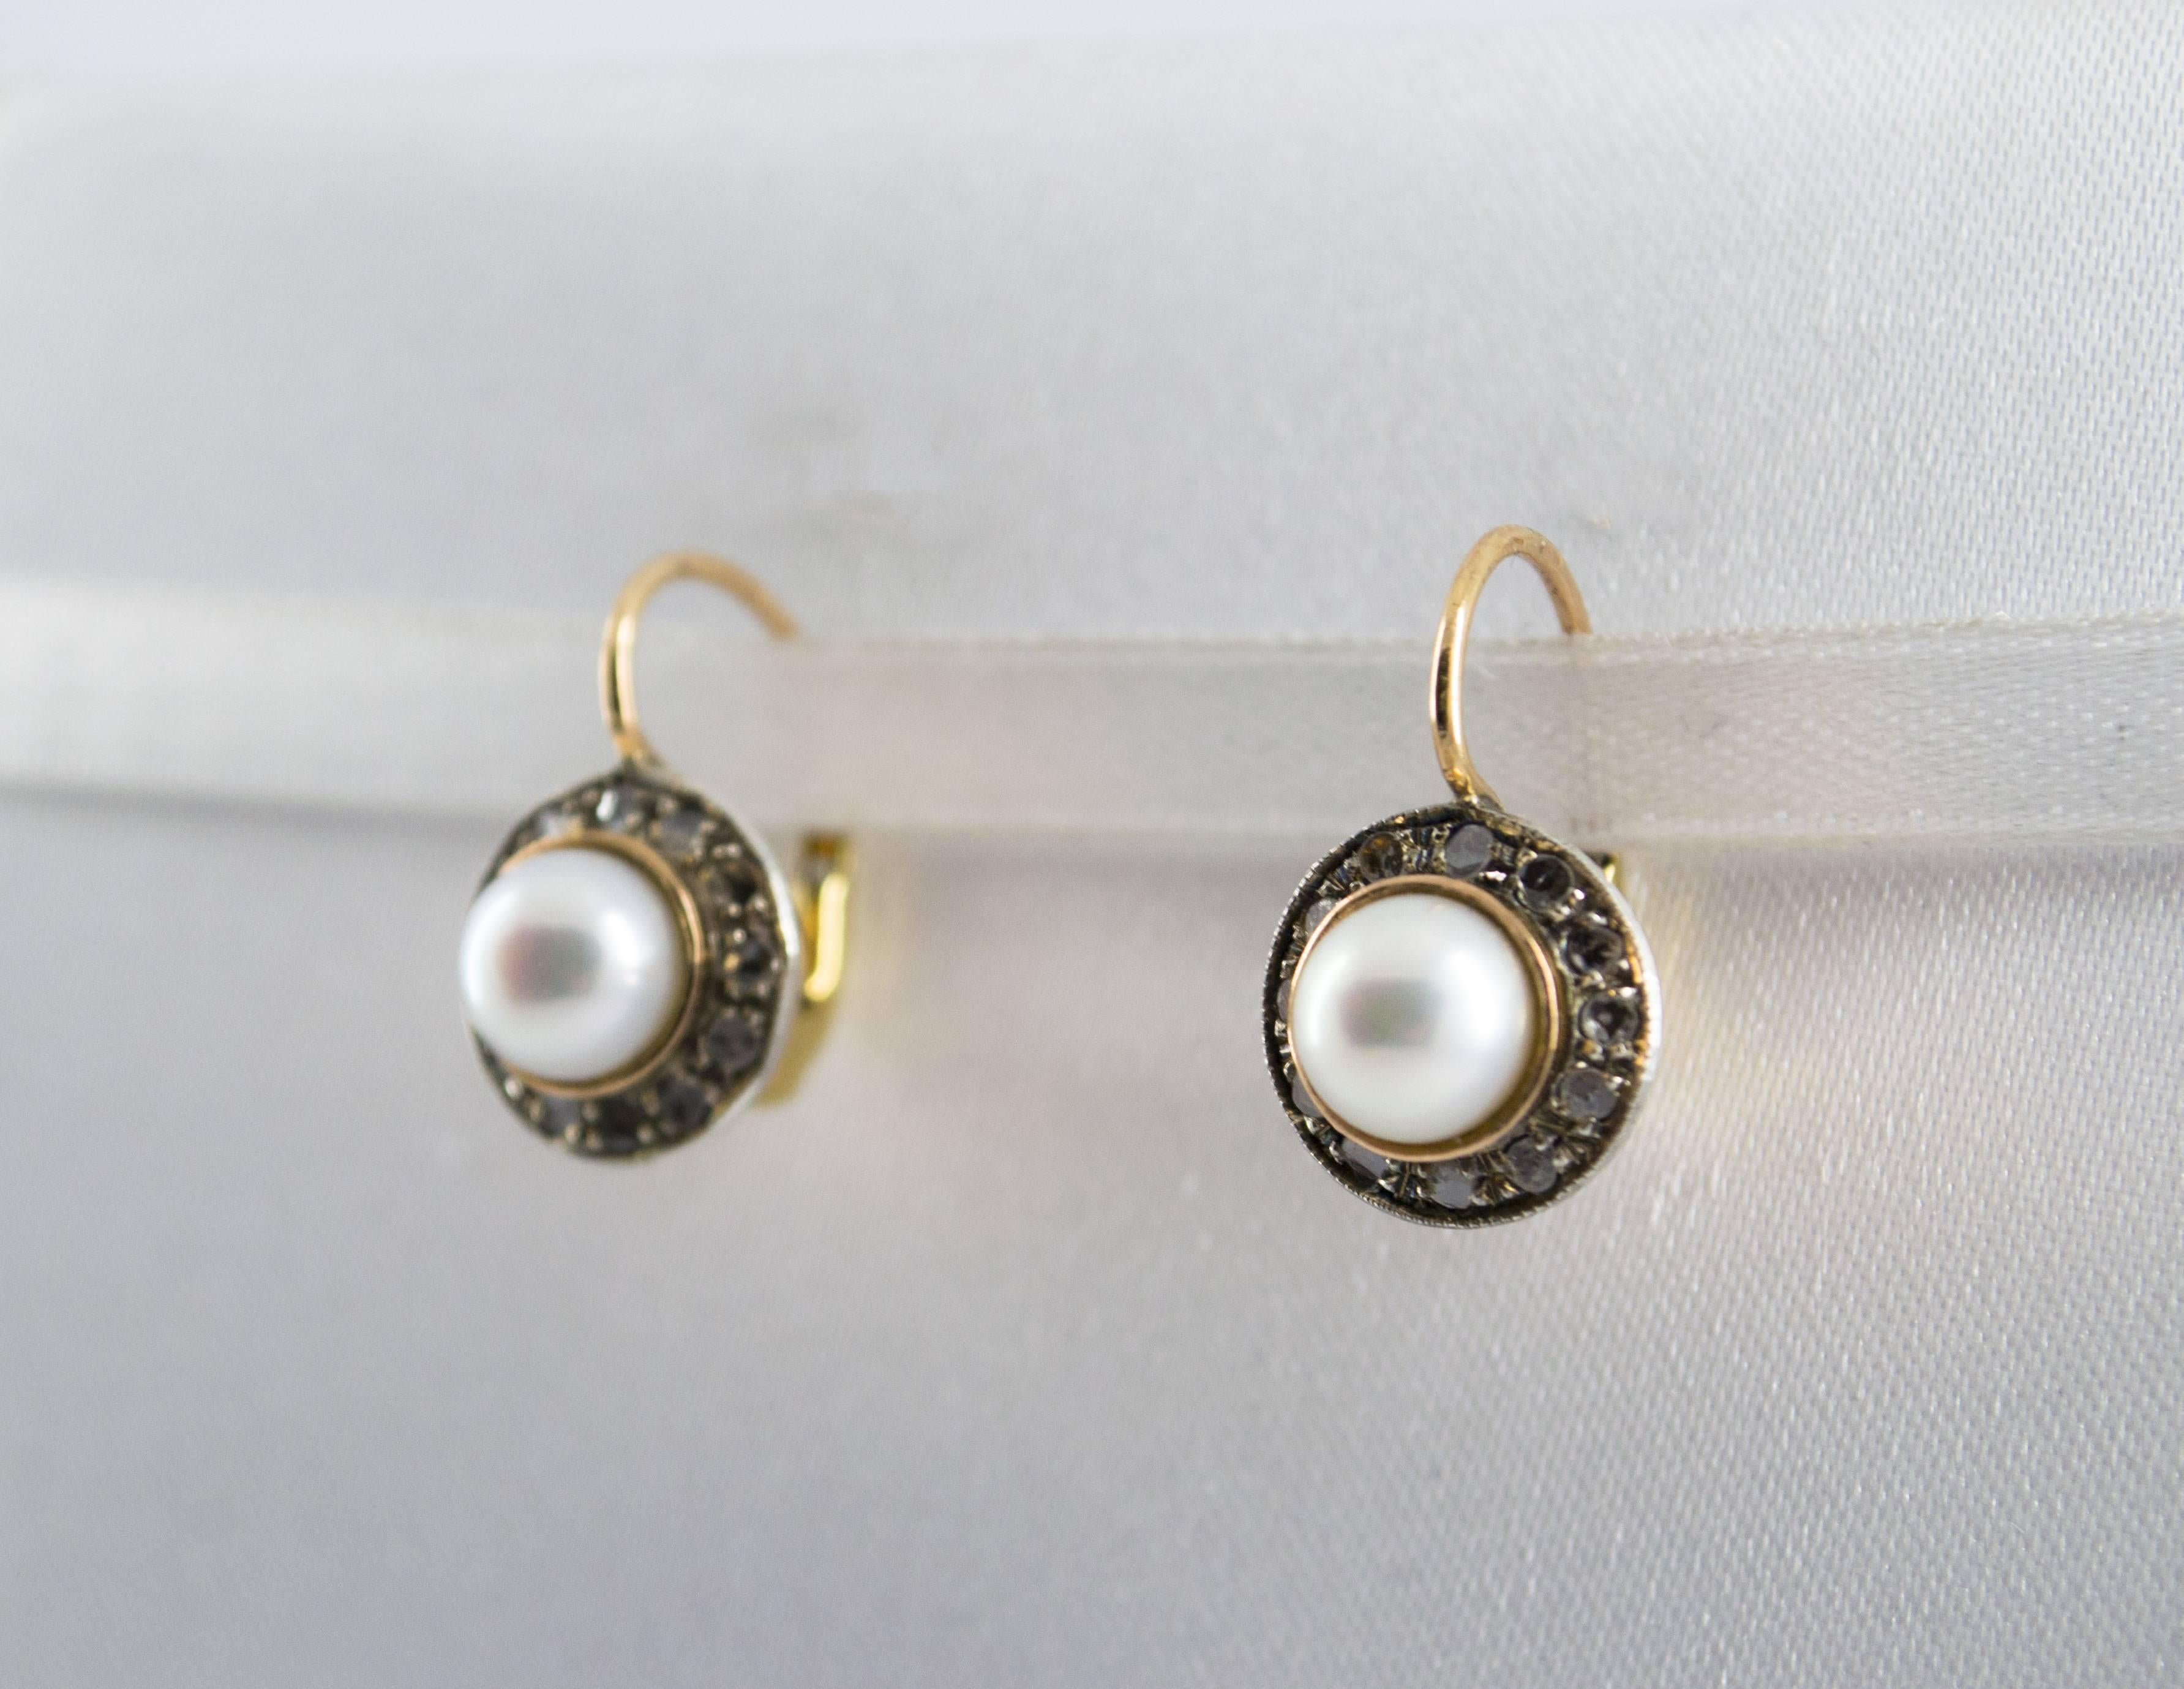 These Earrings are made of 9K Yellow Gold and Sterling Silver.
These Earrings have 0.20 Carats of Diamonds.
These Earrings have also Pearls.
All our Earrings have pins for pierced ears but we can change the closure and make any of our Earrings